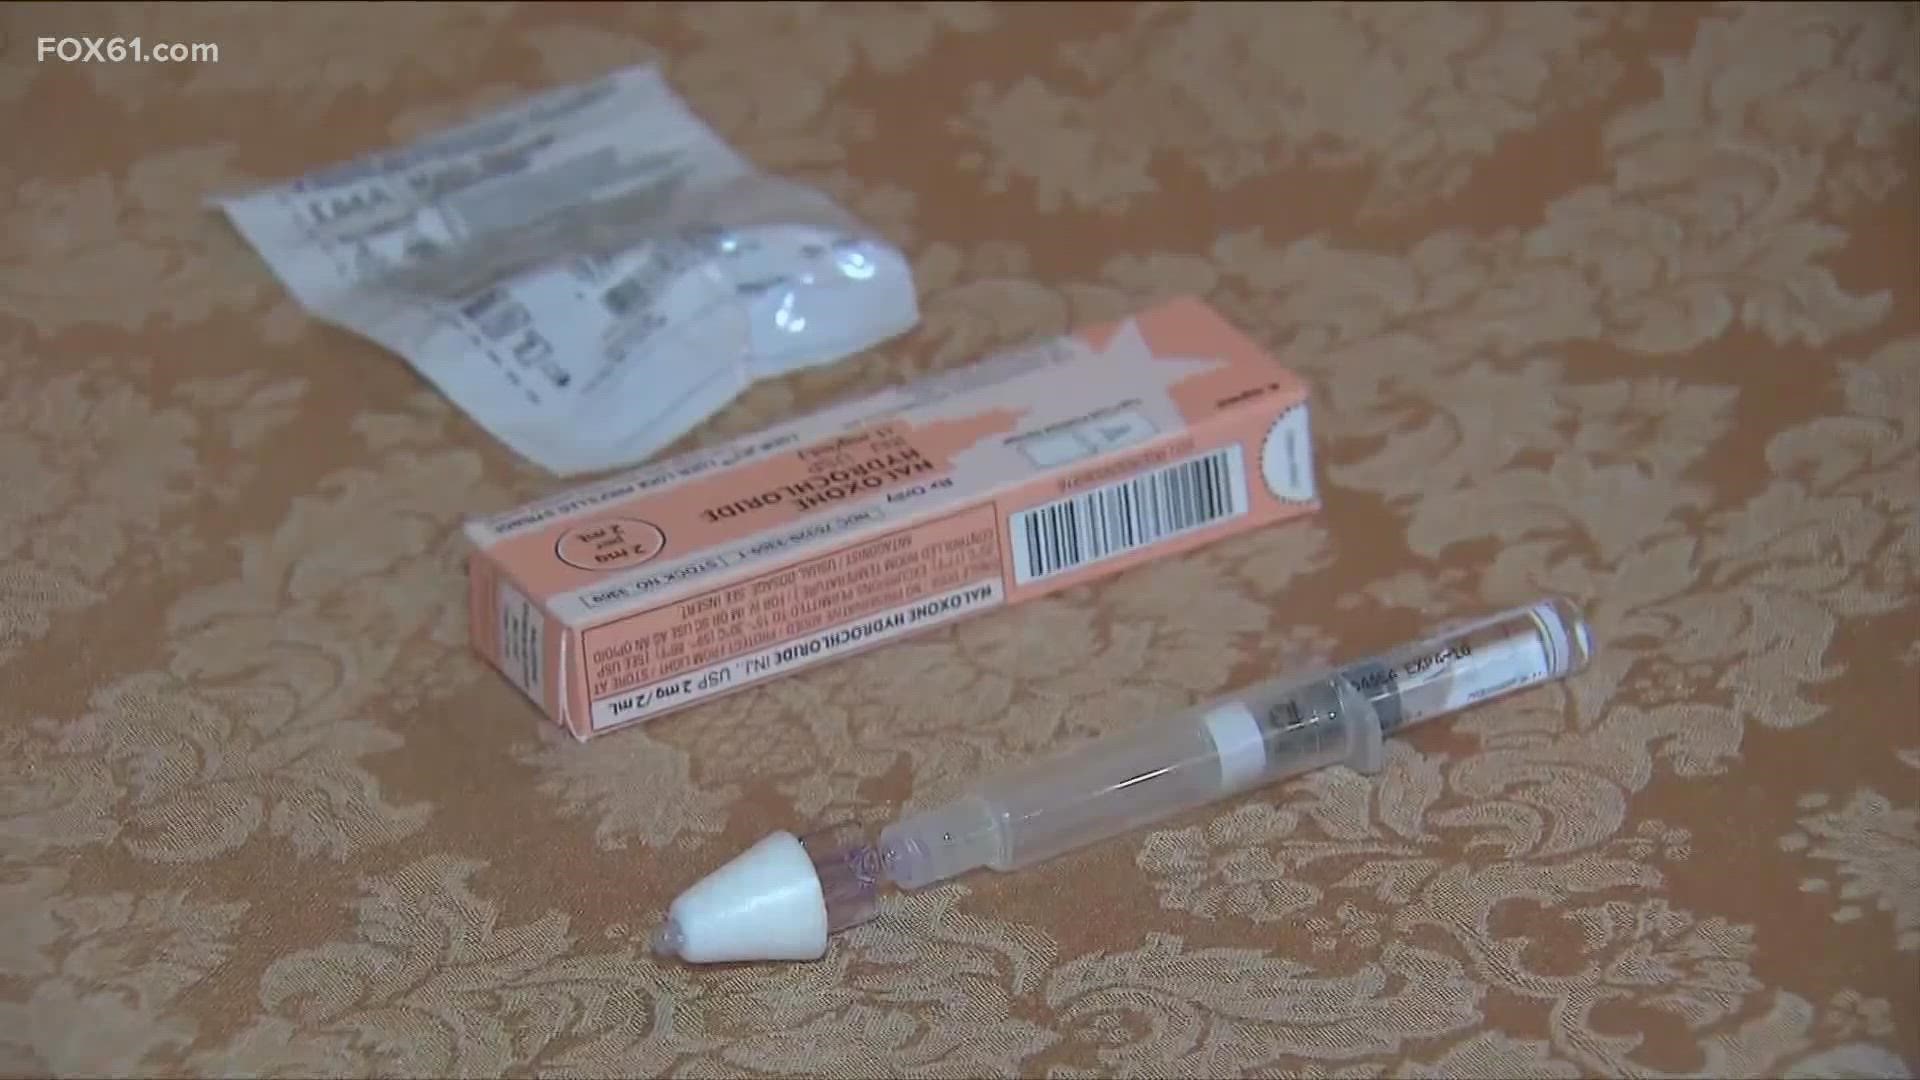 Vowing legislation and serious talks about brining Narcan into schools